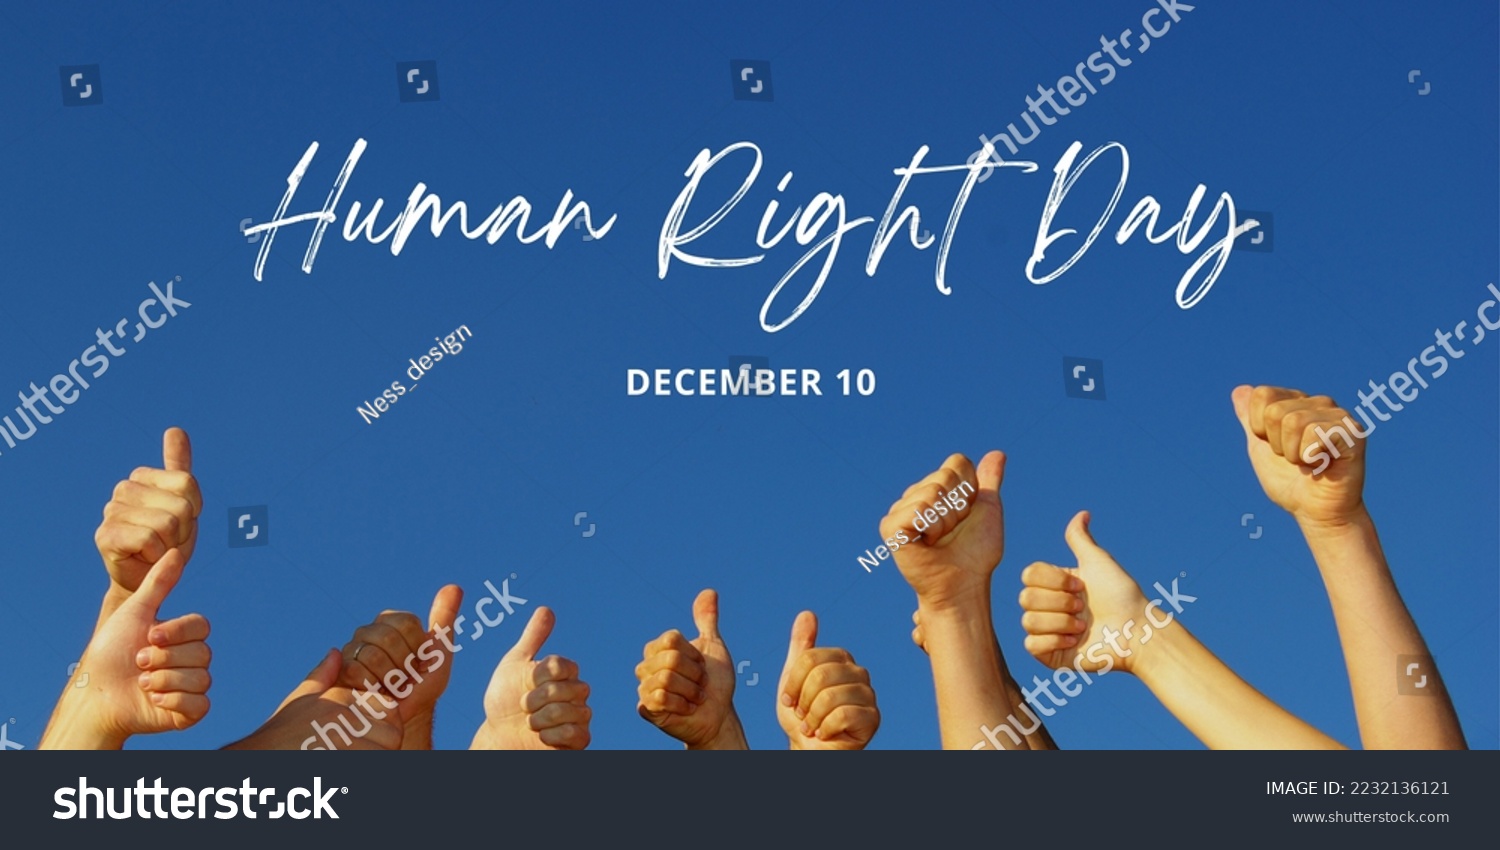 International human rights day concept: group of people, hands in the air, cheerful gesture or celebration for global human rights day. December 10. #2232136121